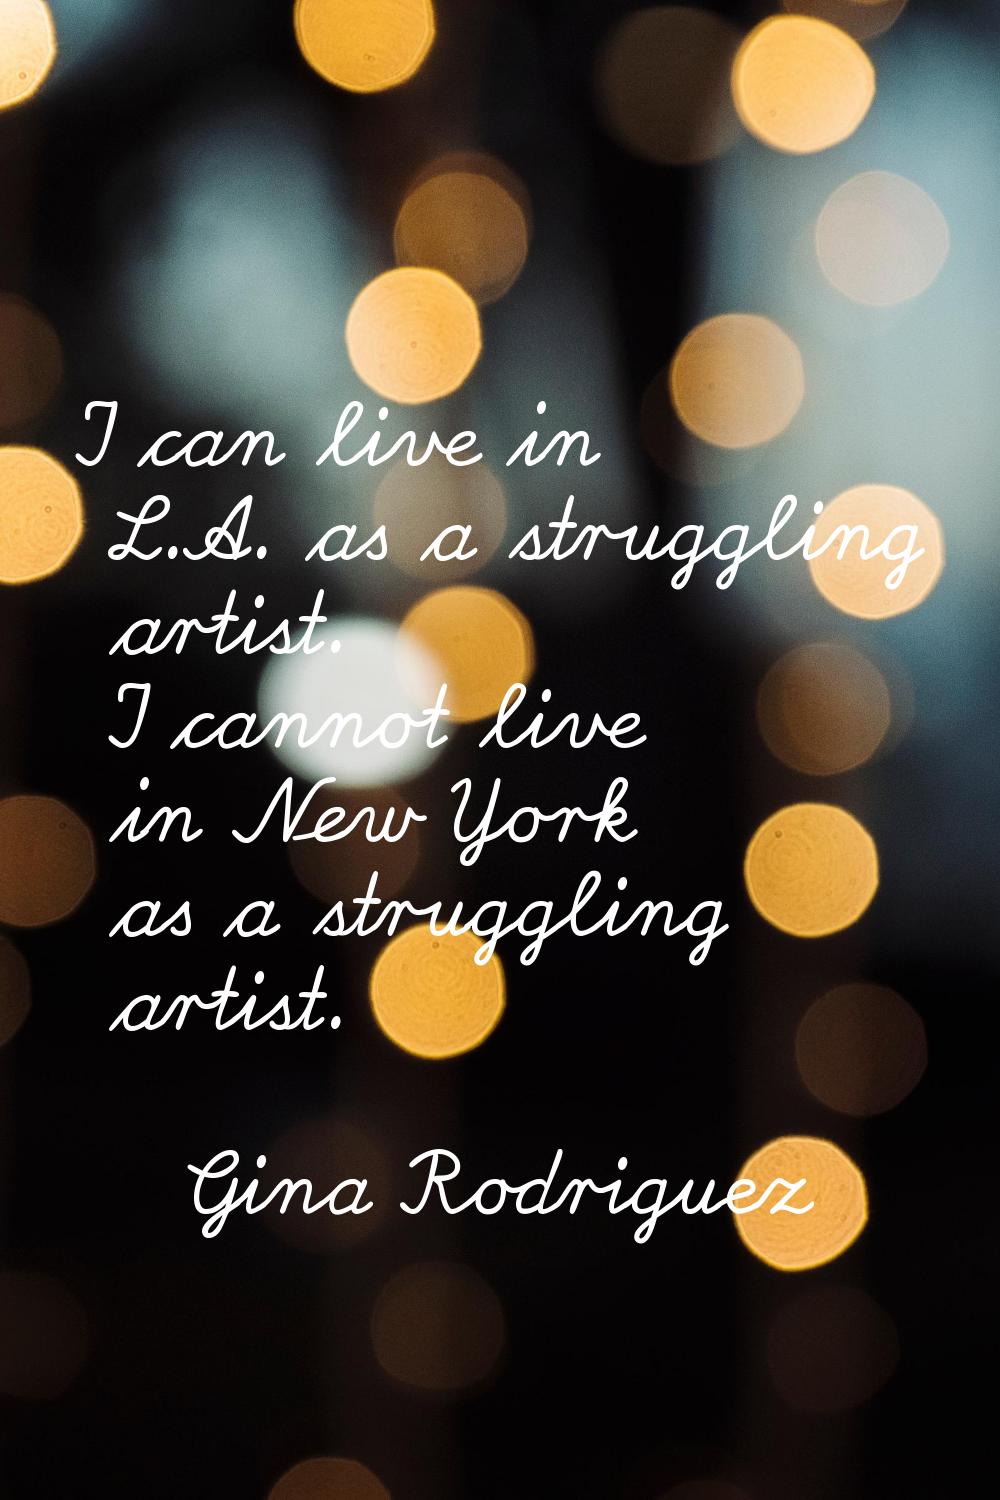 I can live in L.A. as a struggling artist. I cannot live in New York as a struggling artist.